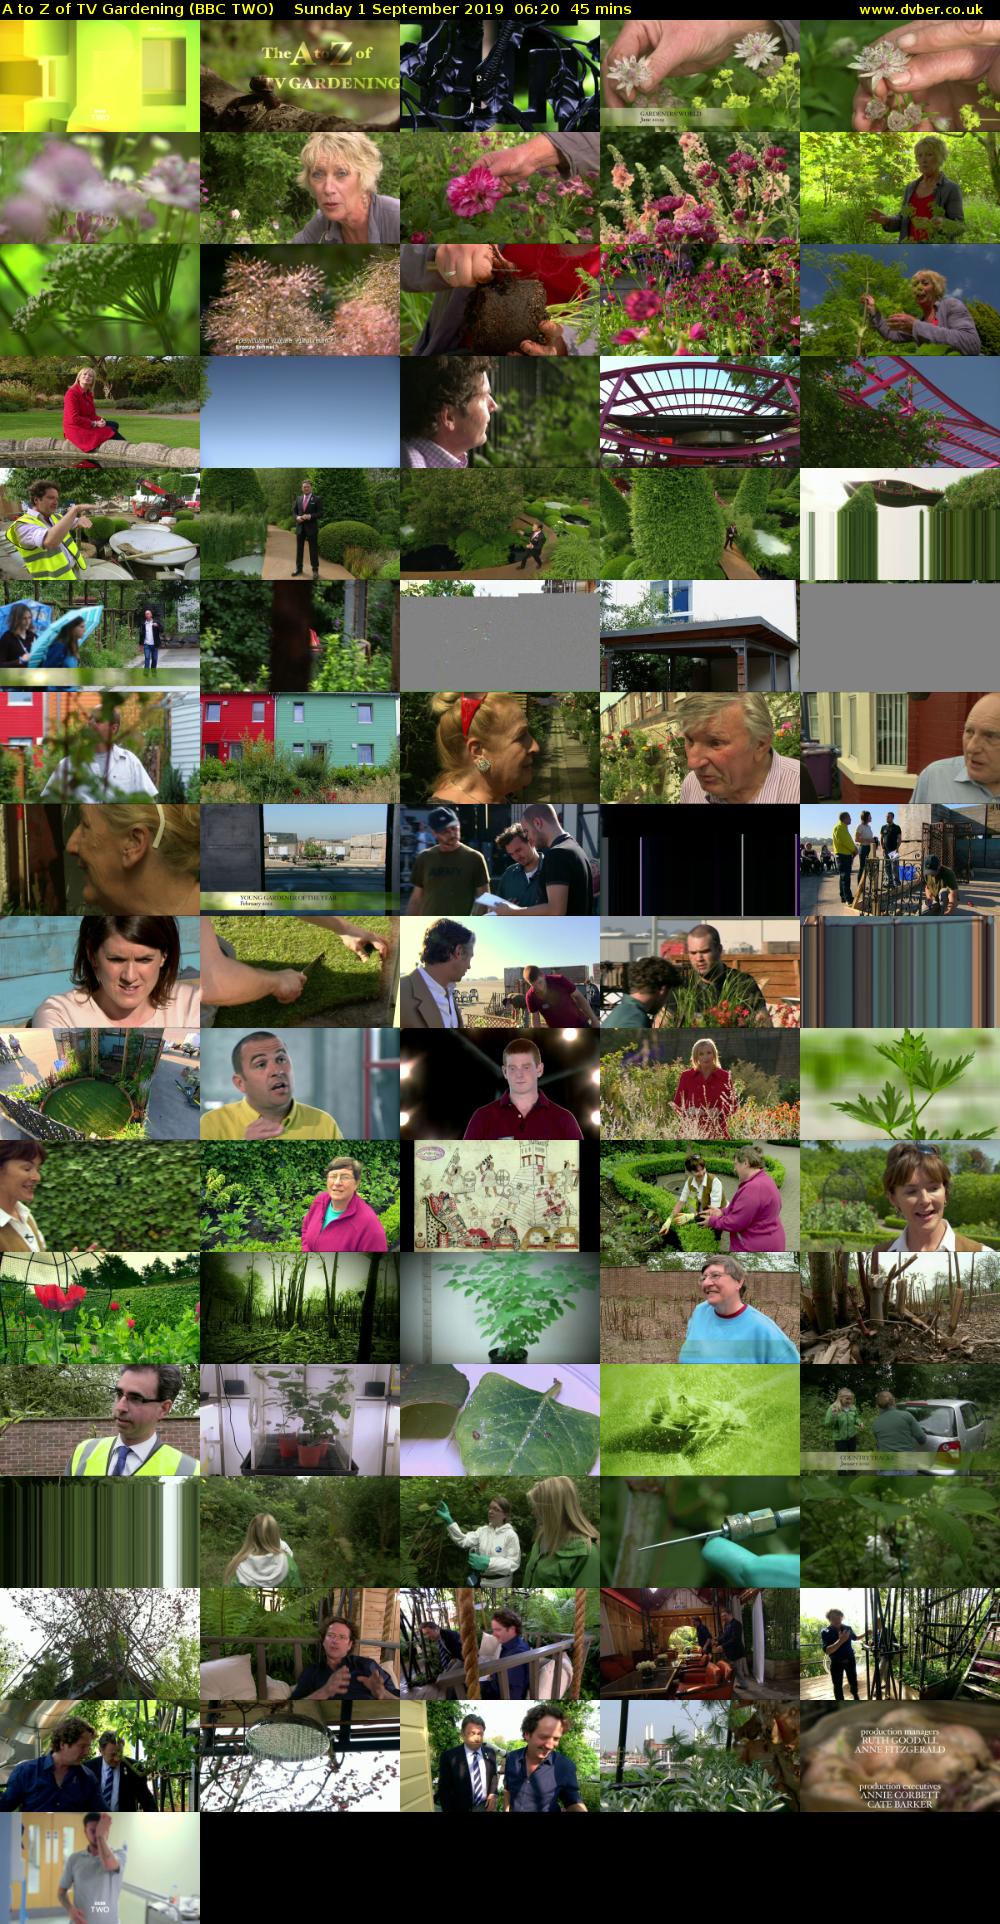 A to Z of TV Gardening (BBC TWO) Sunday 1 September 2019 06:20 - 07:05